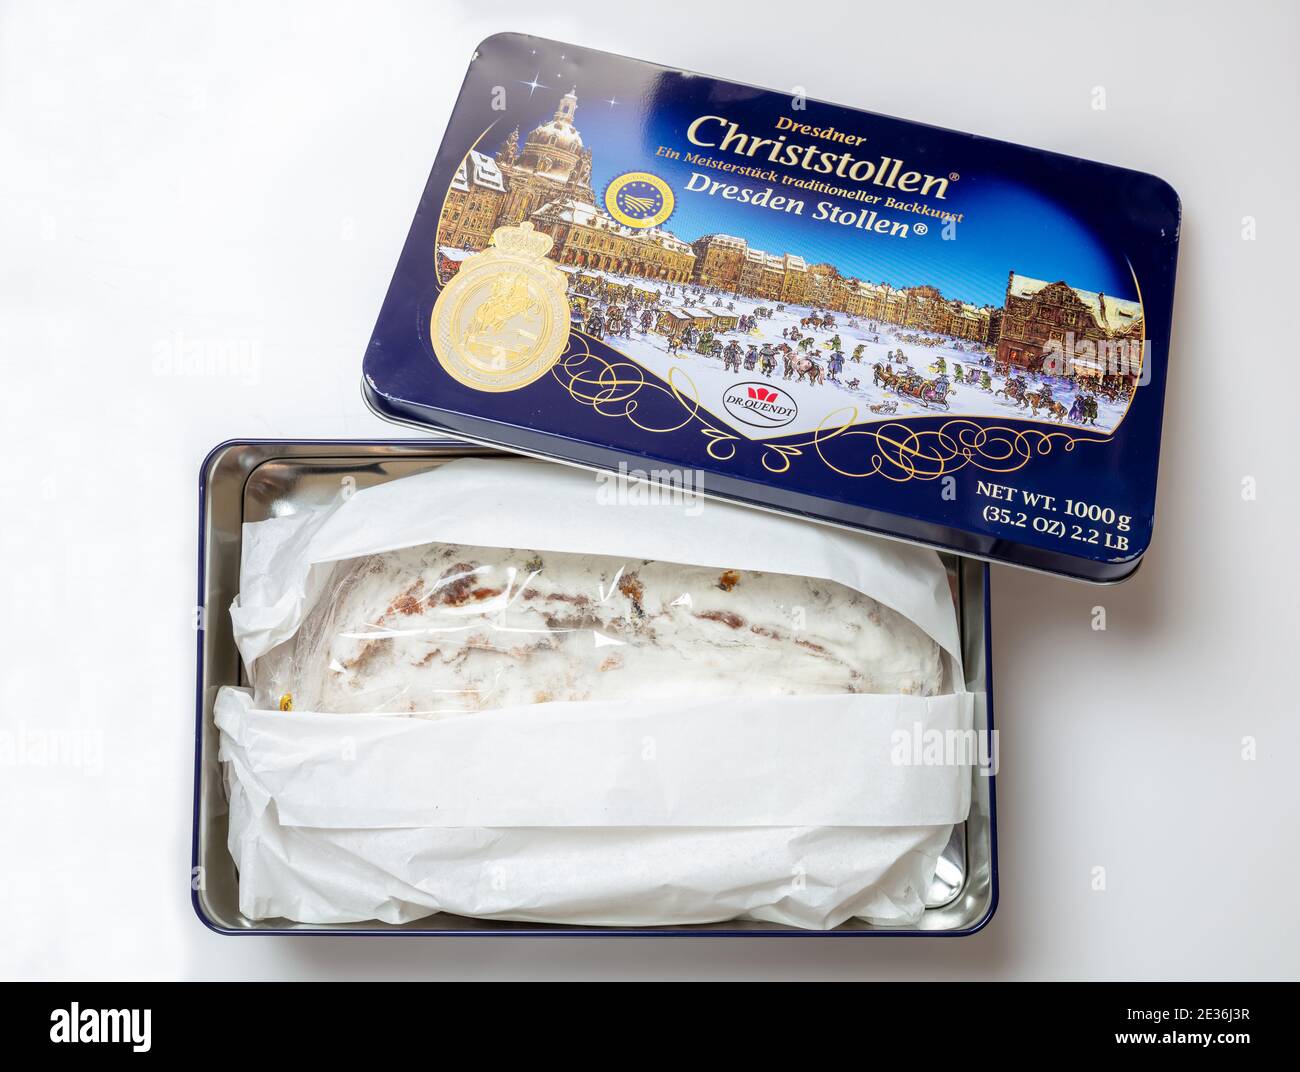 Athens Greece, December 23, 2020. Christmas stollen cake, Dr Quendt Christstollen. Sweet german traditional bread wraped in a metal box, top view. Xma Stock Photo